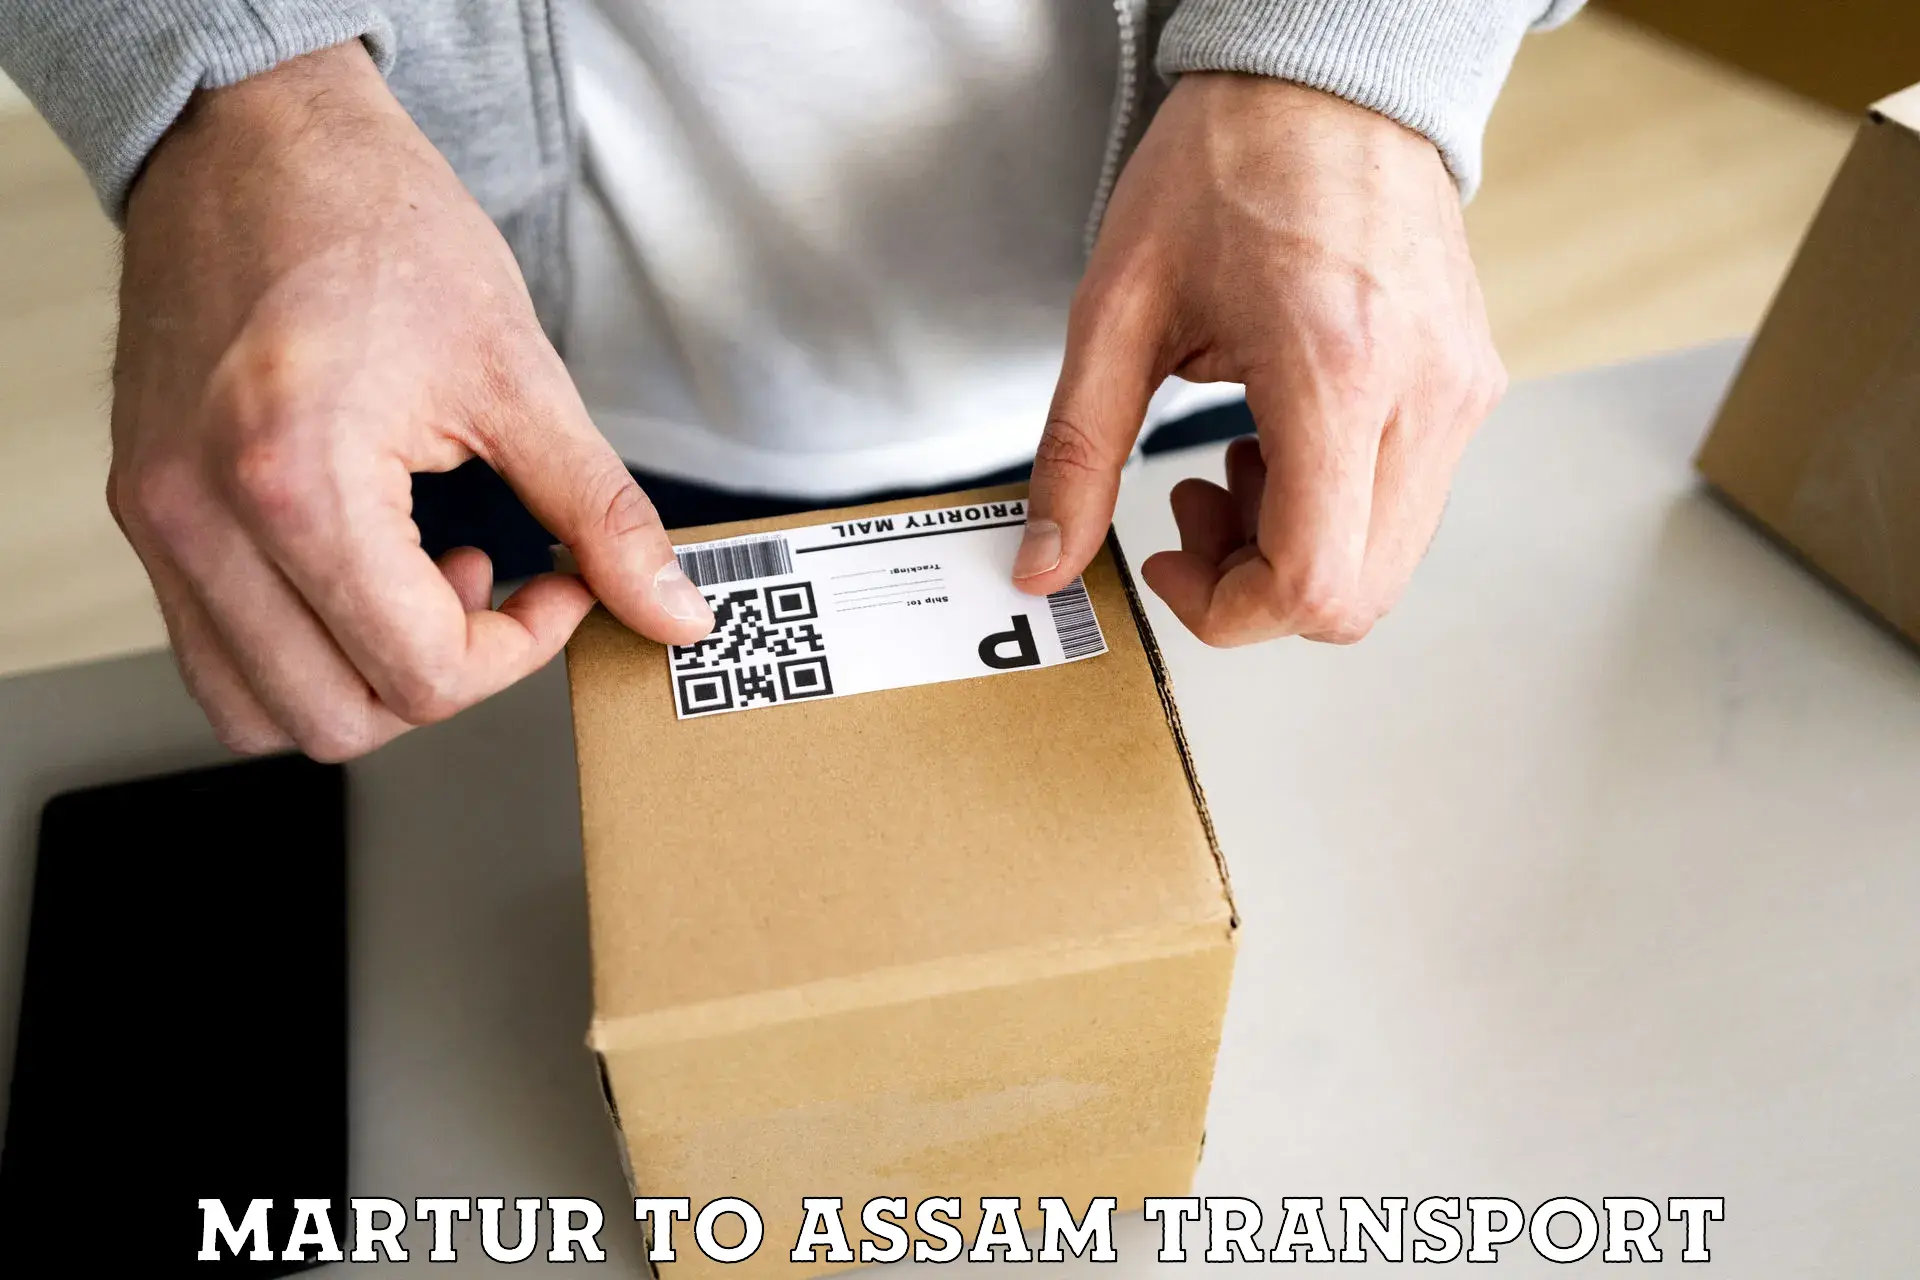 Transport bike from one state to another Martur to Assam